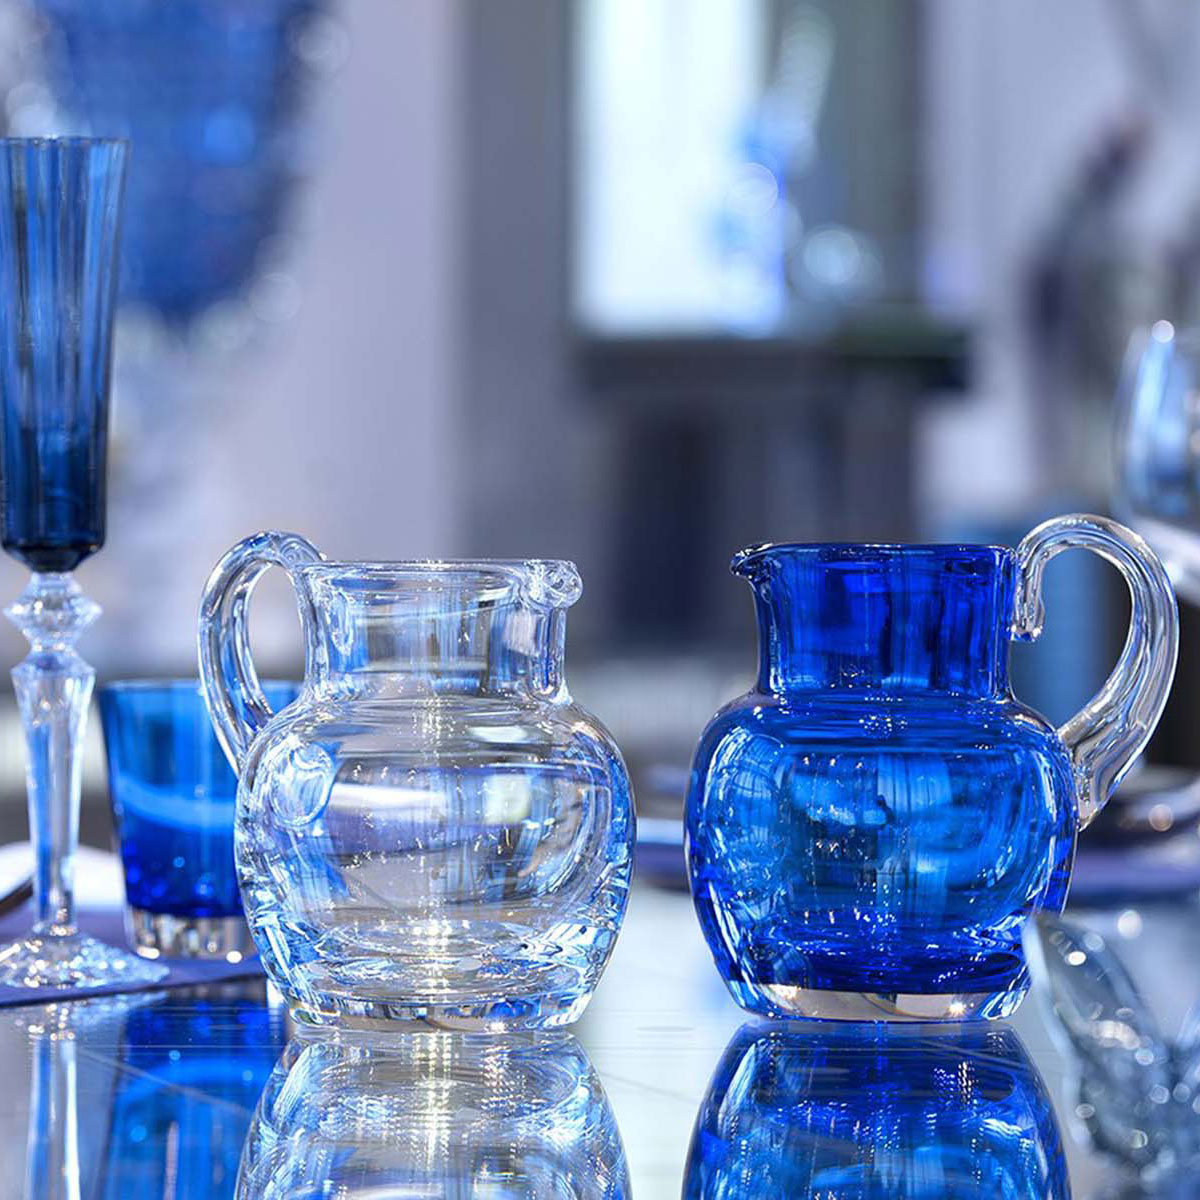 Baccarat Crystal, Mosaique Blue Crystal Pitcher